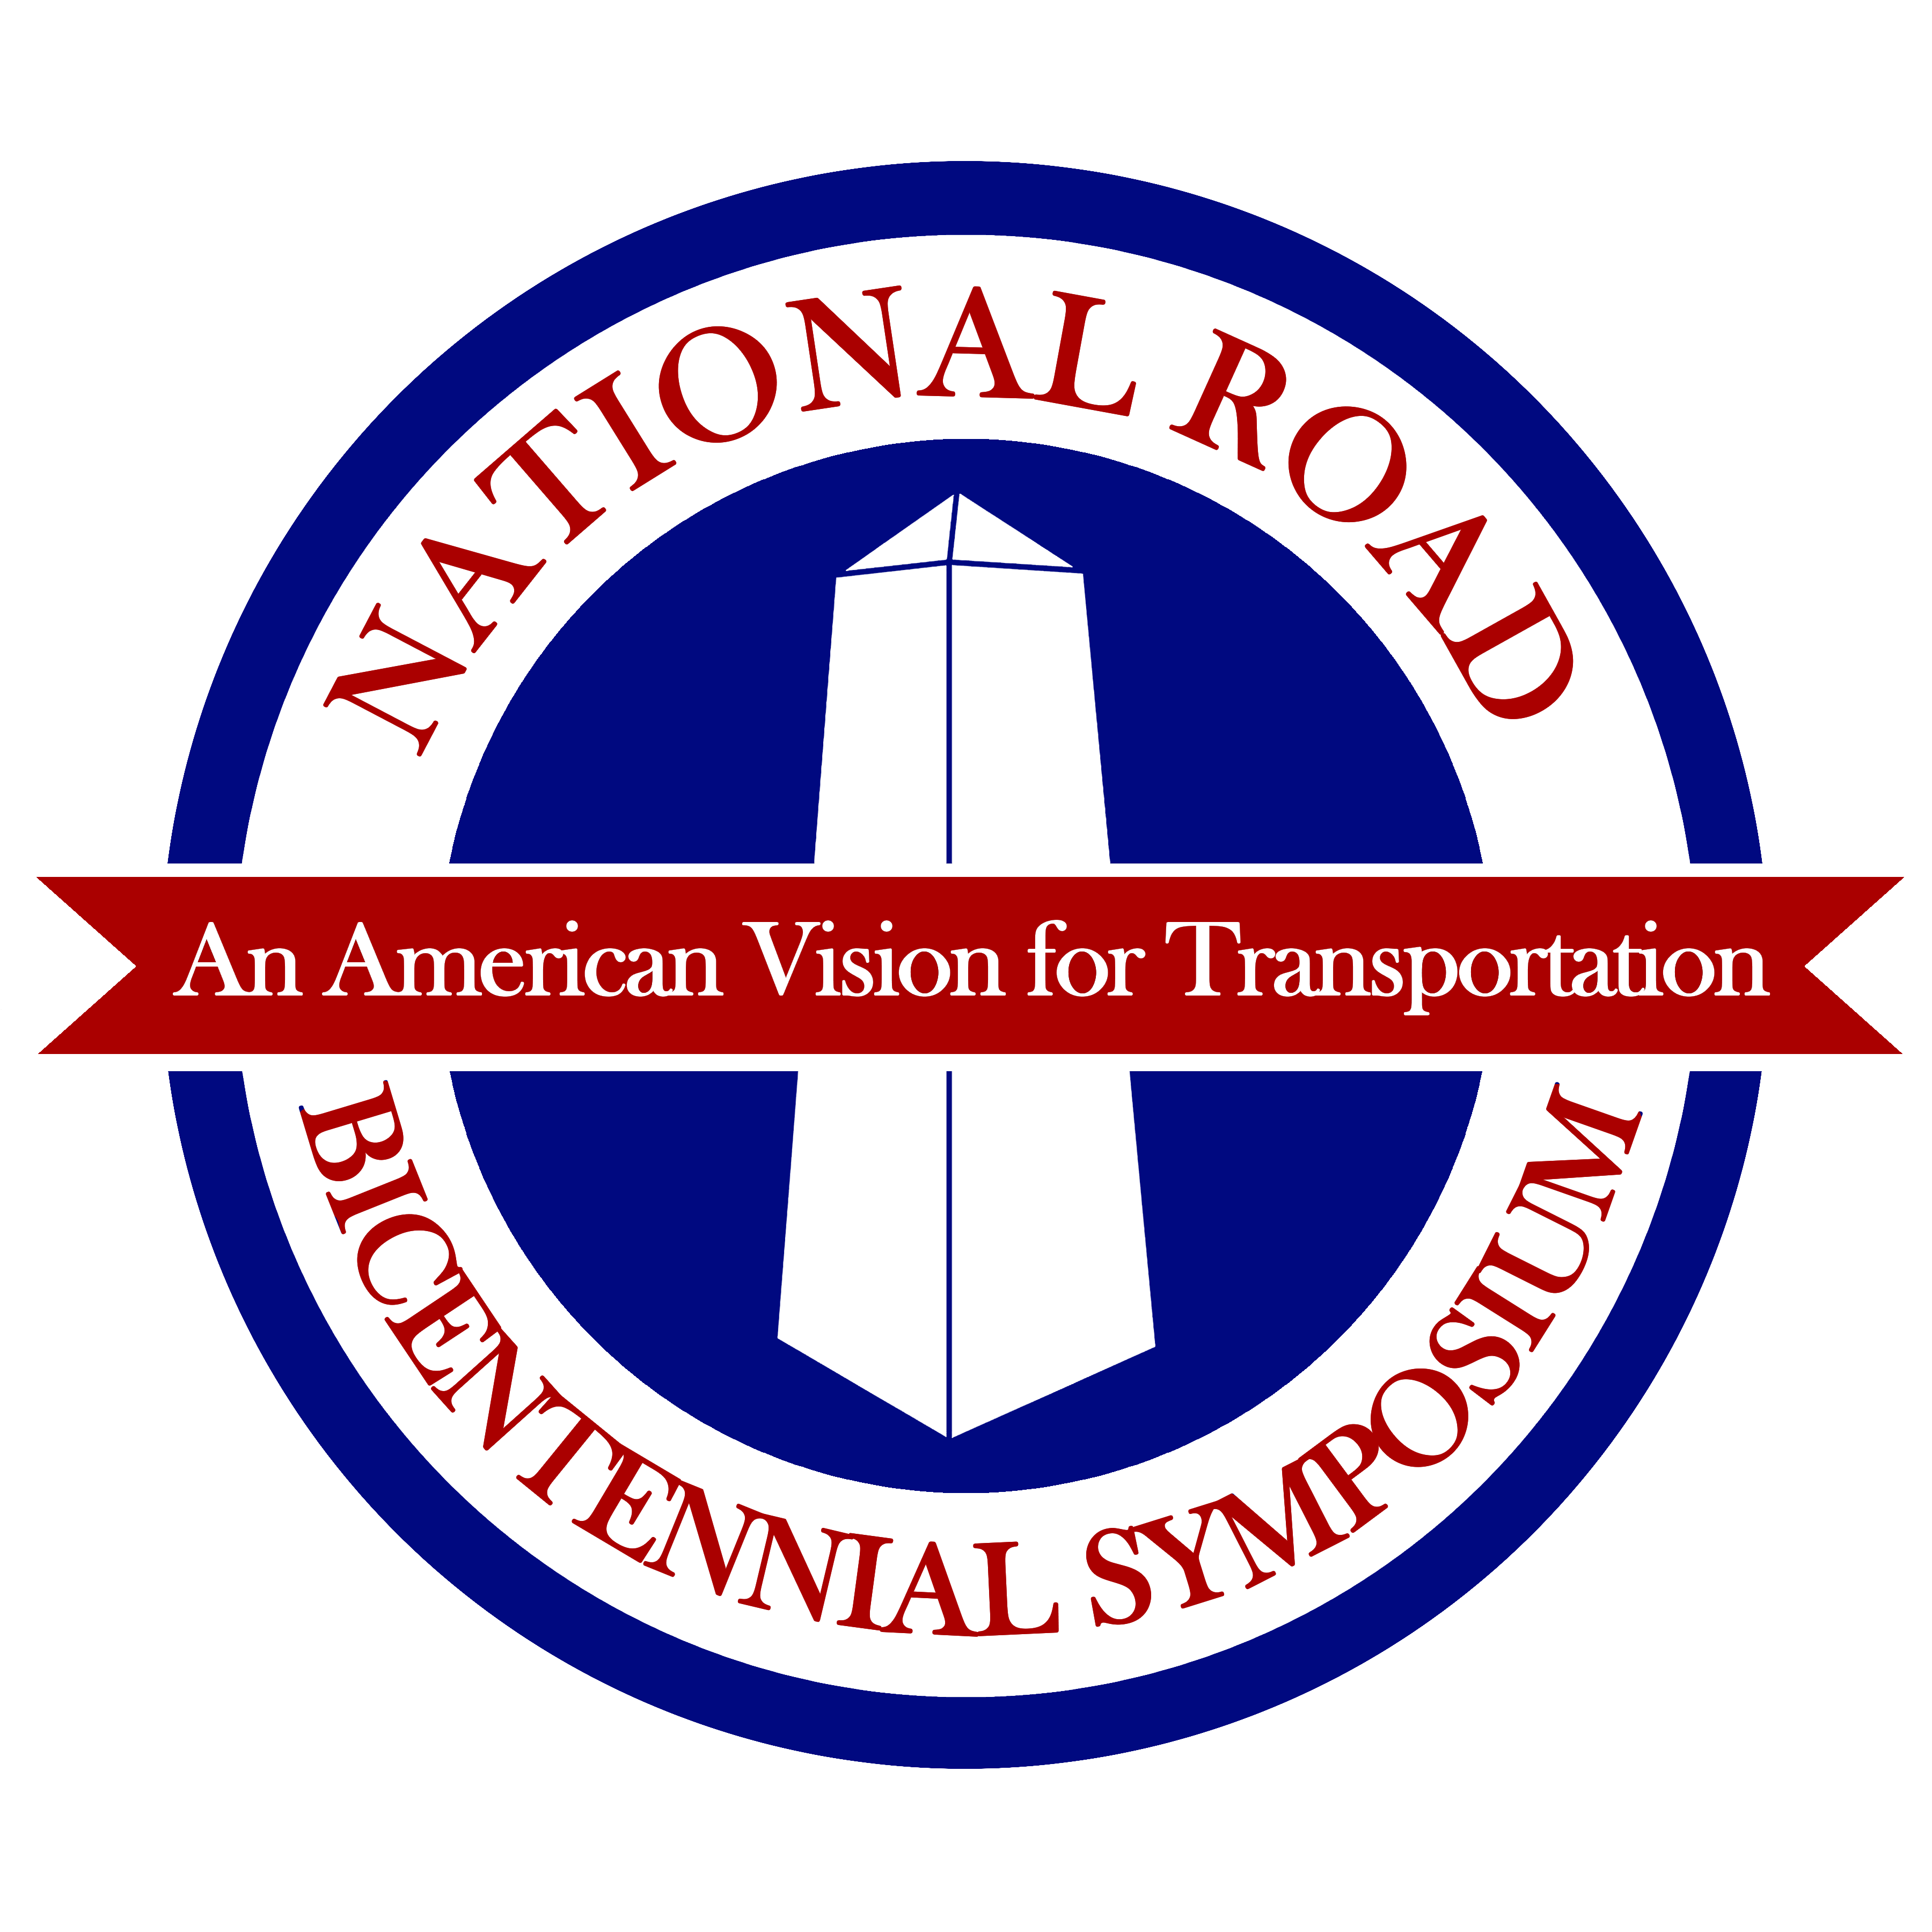 logo created for the National Road Bicentennial Symposium and used with permission